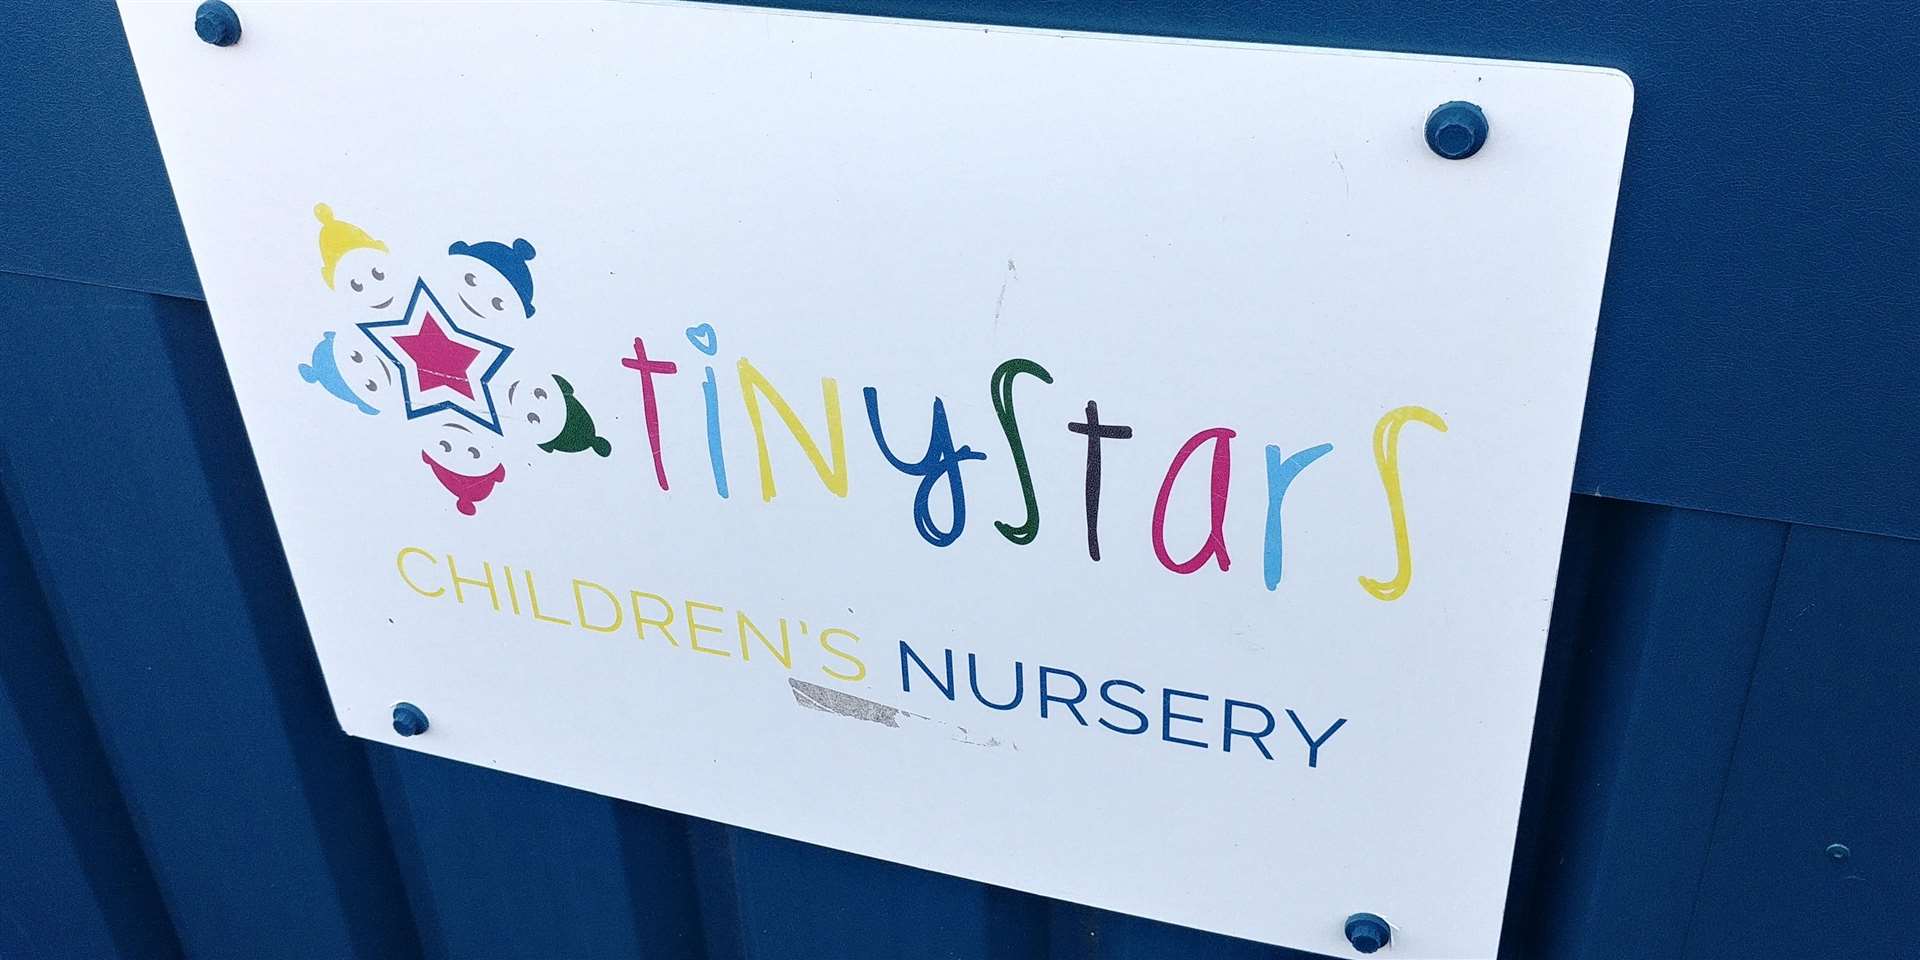 Tiny Stars nursery in Simmonds Road in Canterbury has been rated inadequate by Ofsted. (6176749)